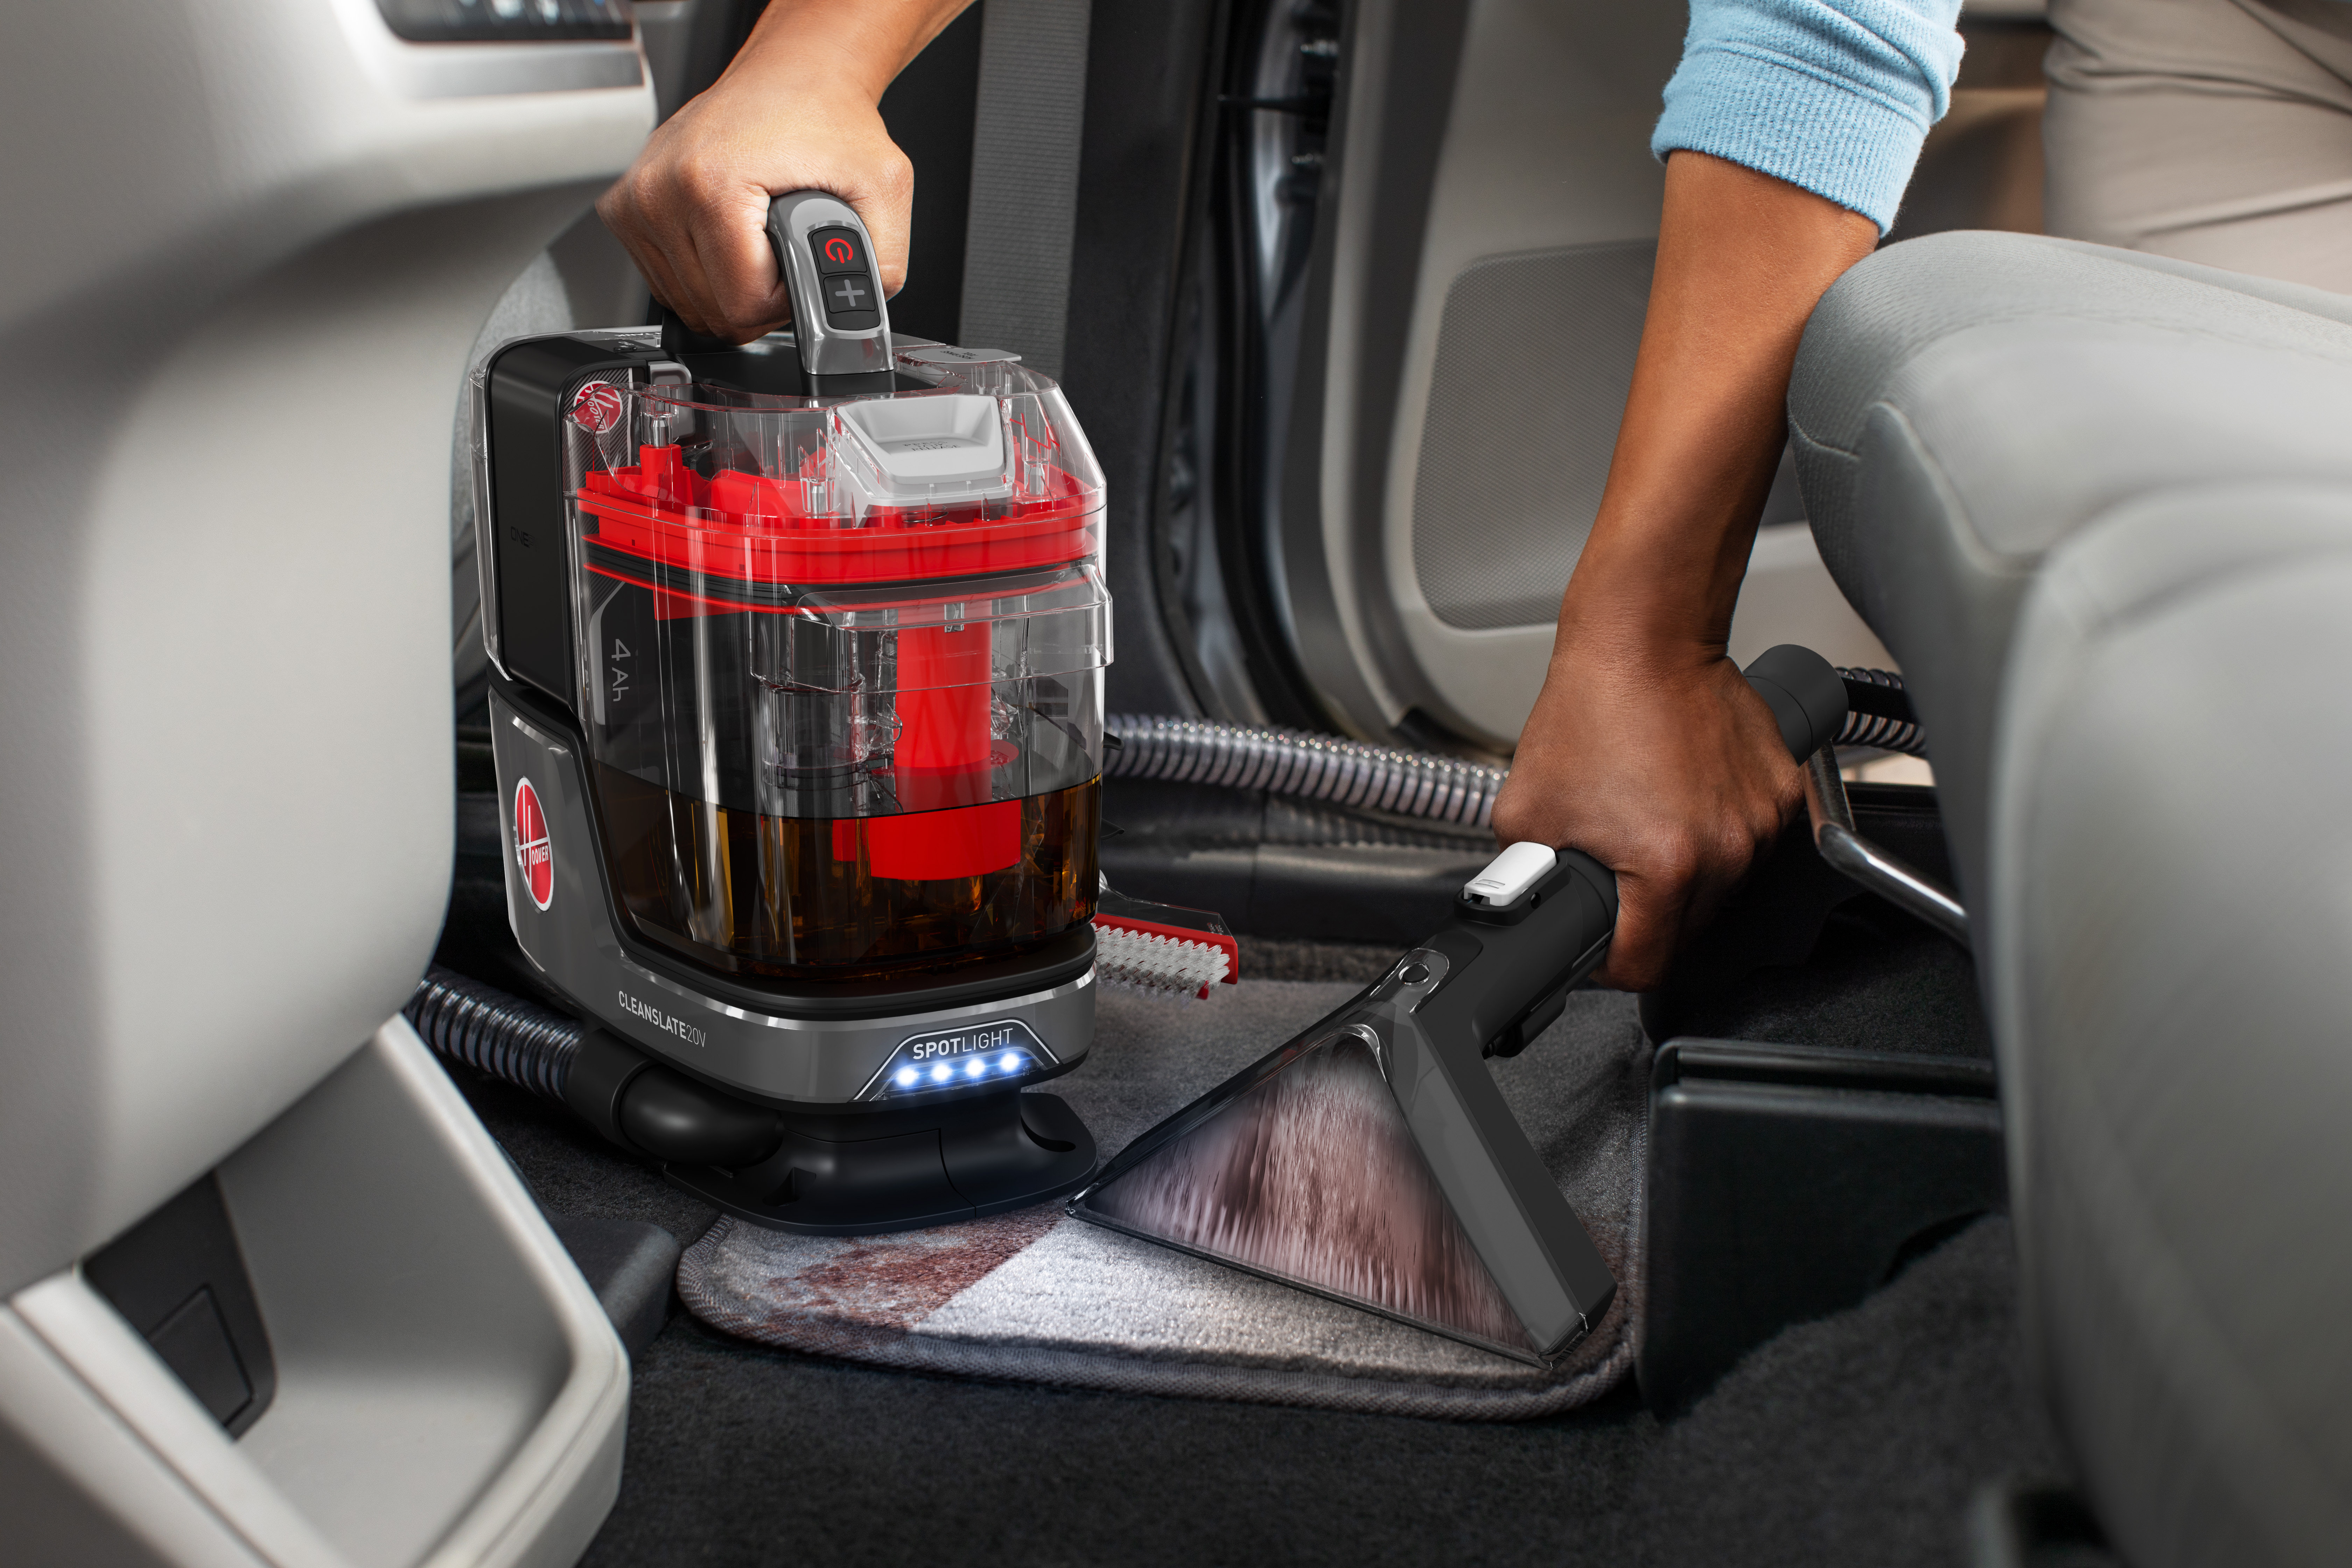 Hoover Cleanslate Portable Carpet And Upholstery Spot Cleaner